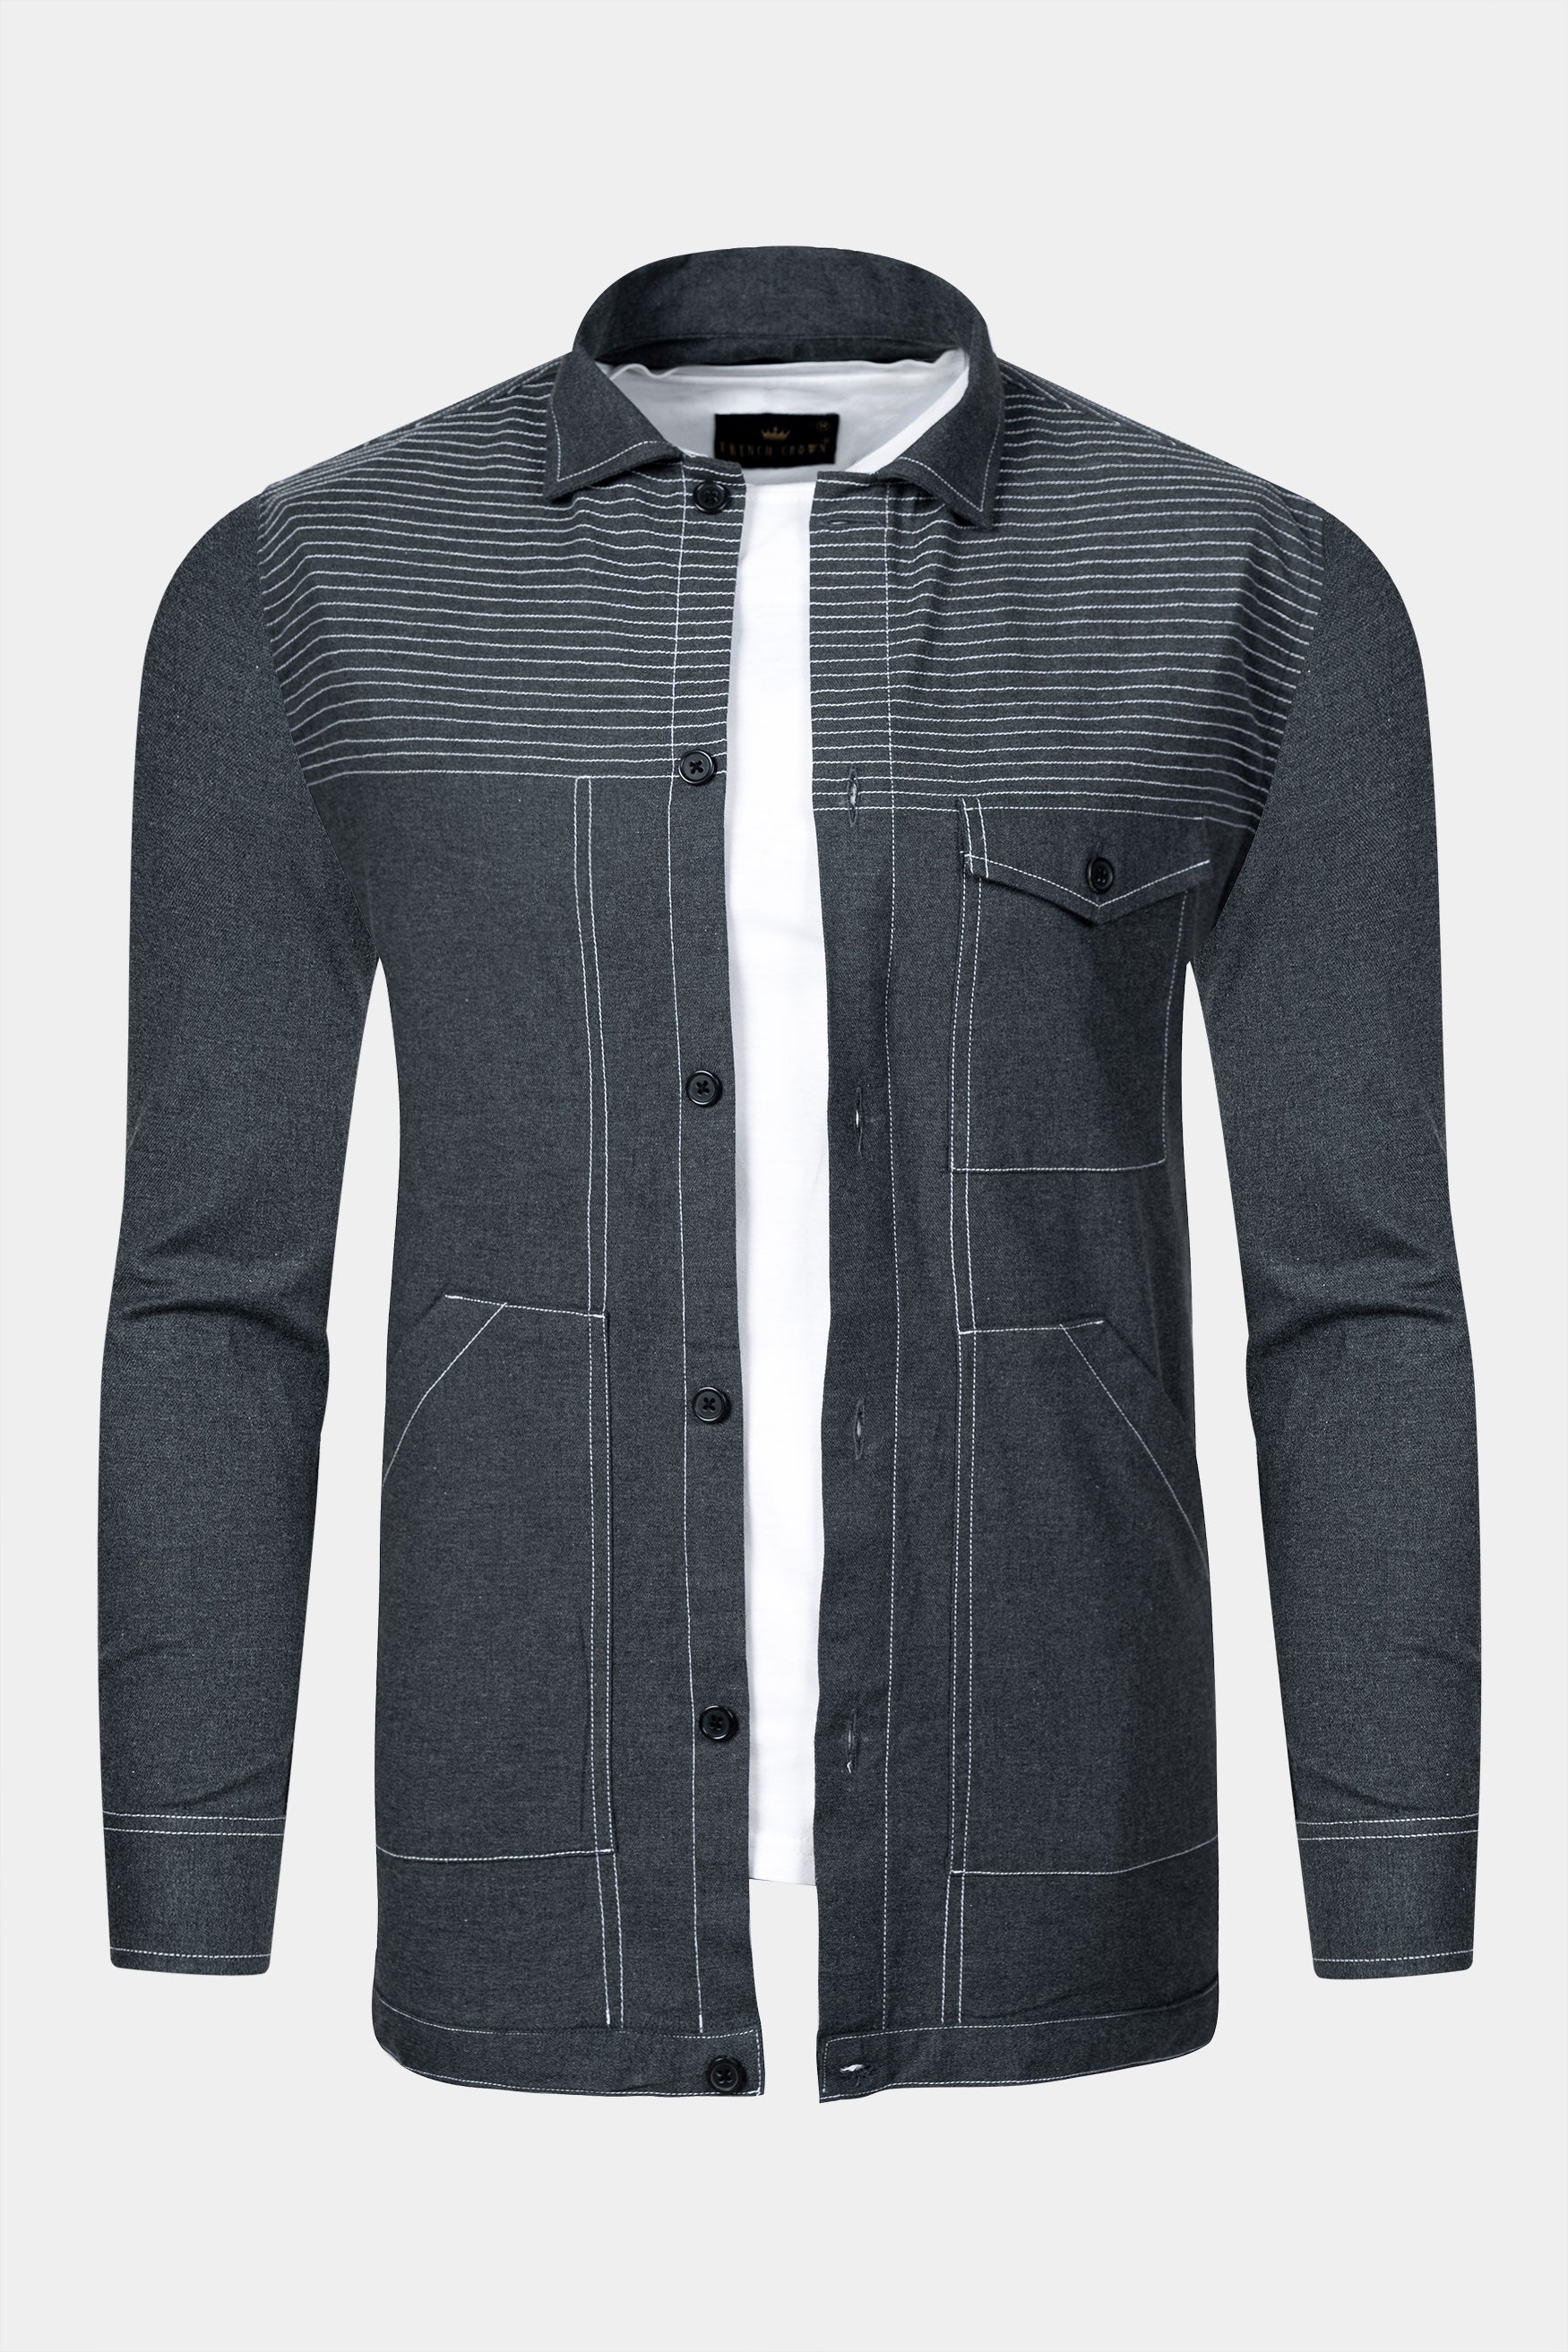 Outer Space Gray Textured Royal Oxford Designer Shirt